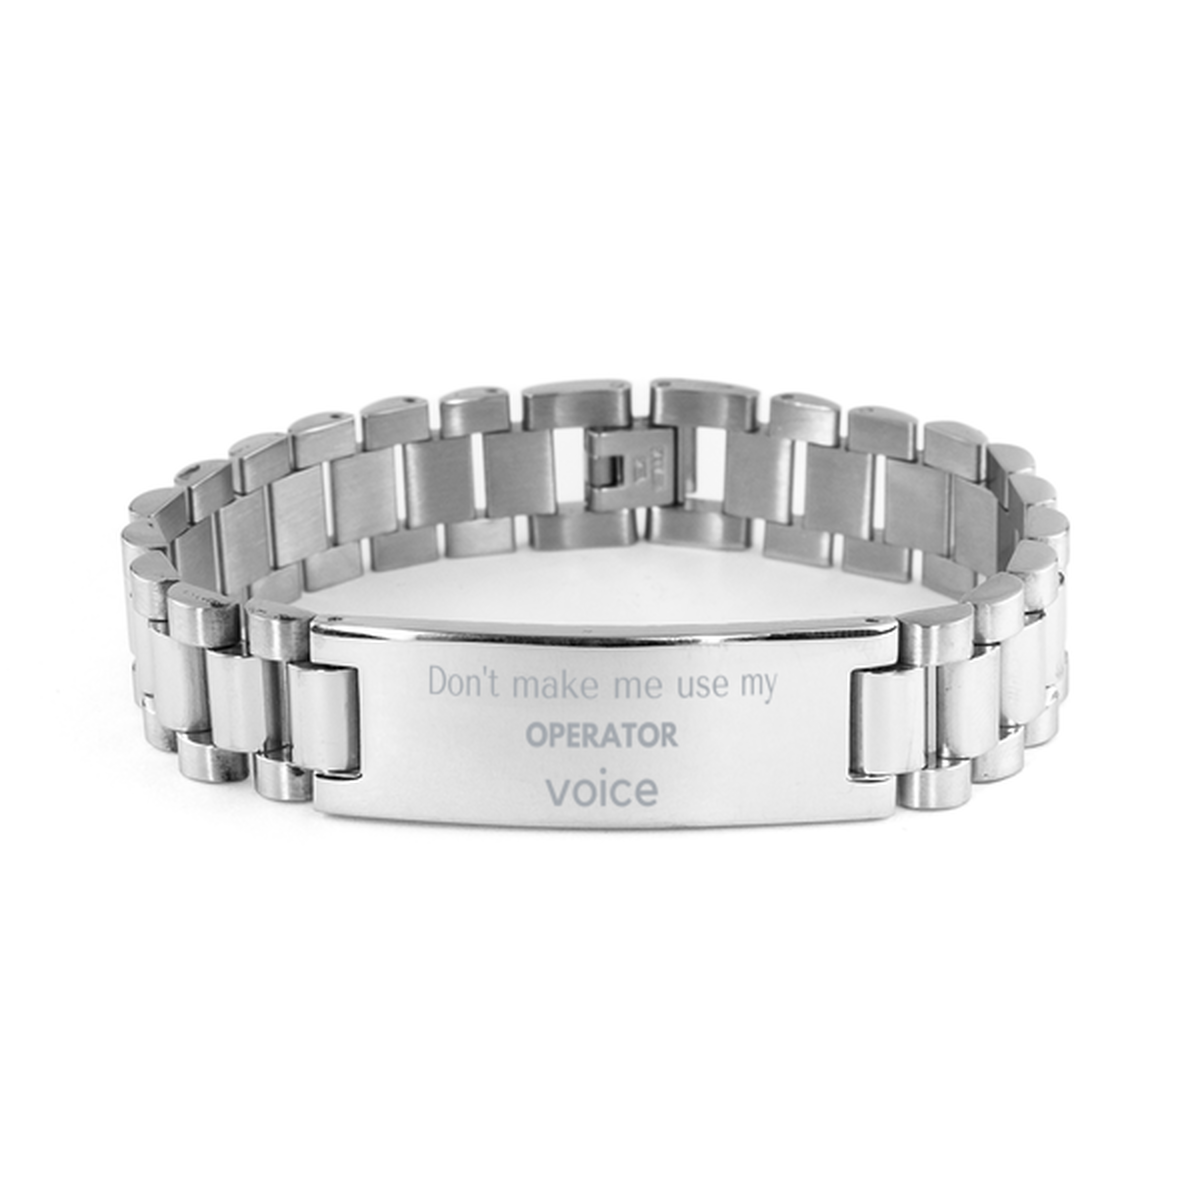 Don't make me use my Operator voice, Sarcasm Operator Gifts, Christmas Operator Ladder Stainless Steel Bracelet Birthday Unique Gifts For Operator Coworkers, Men, Women, Colleague, Friends